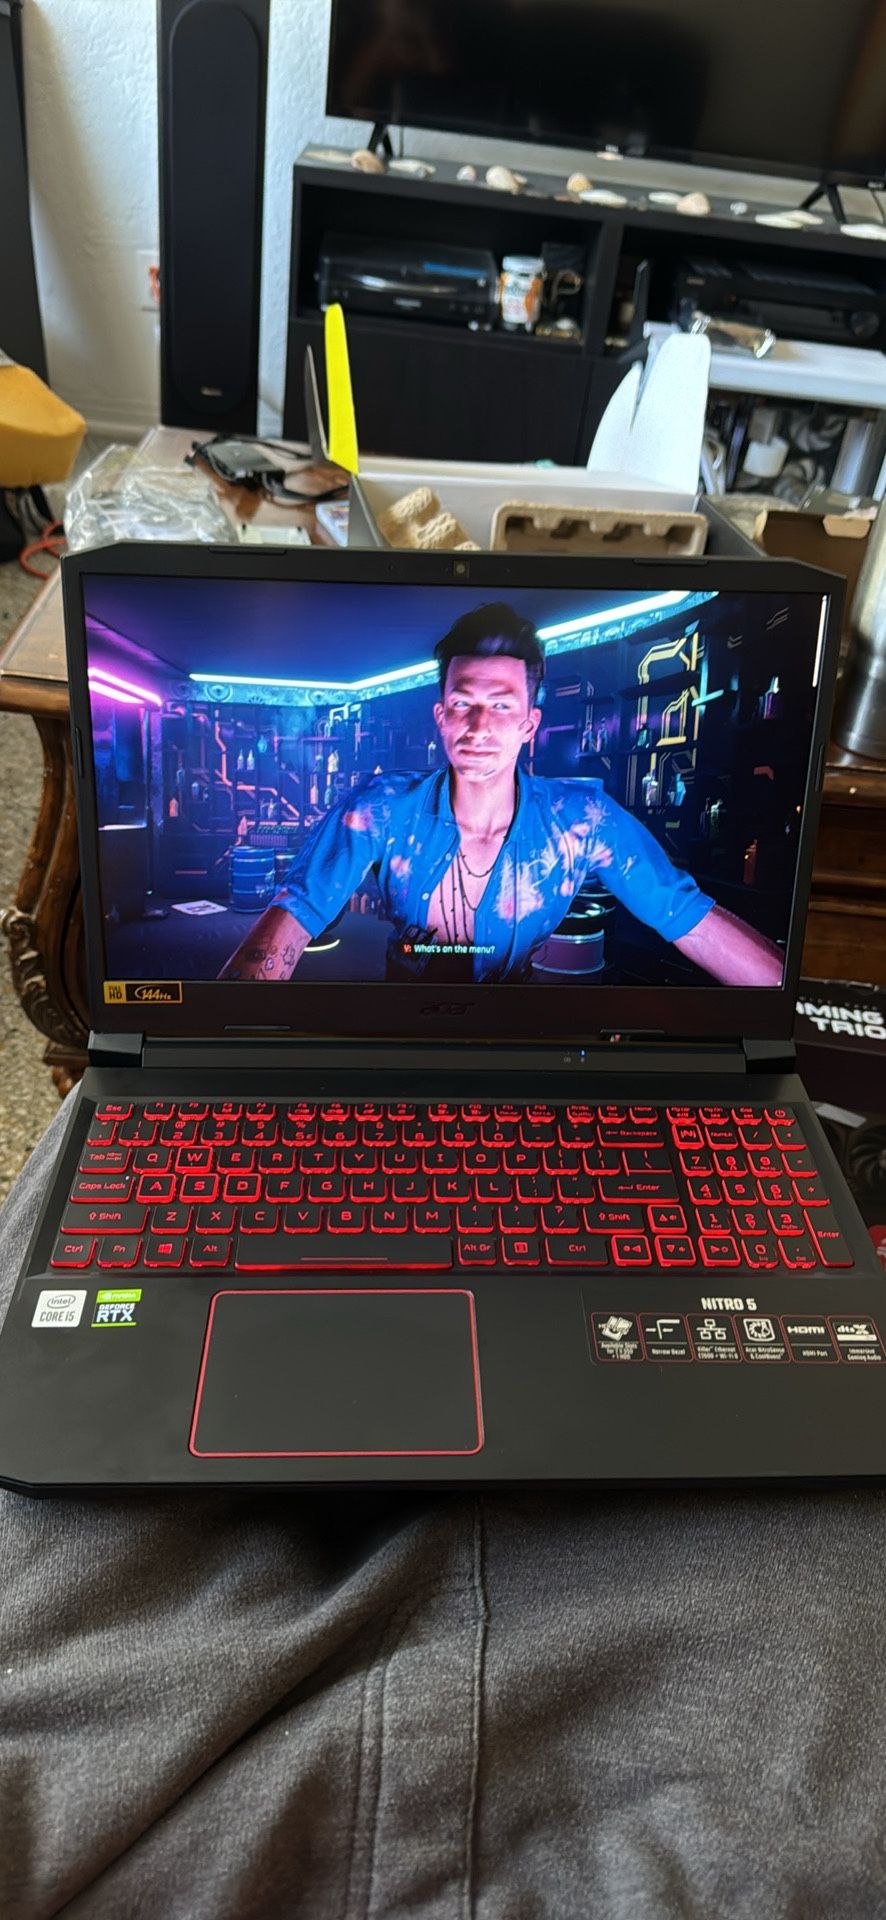 Acer nitro 15 RTX and fully upgraded gaming laptop 32gb fury impact ram and 2tb 990 pro Samsung ssd